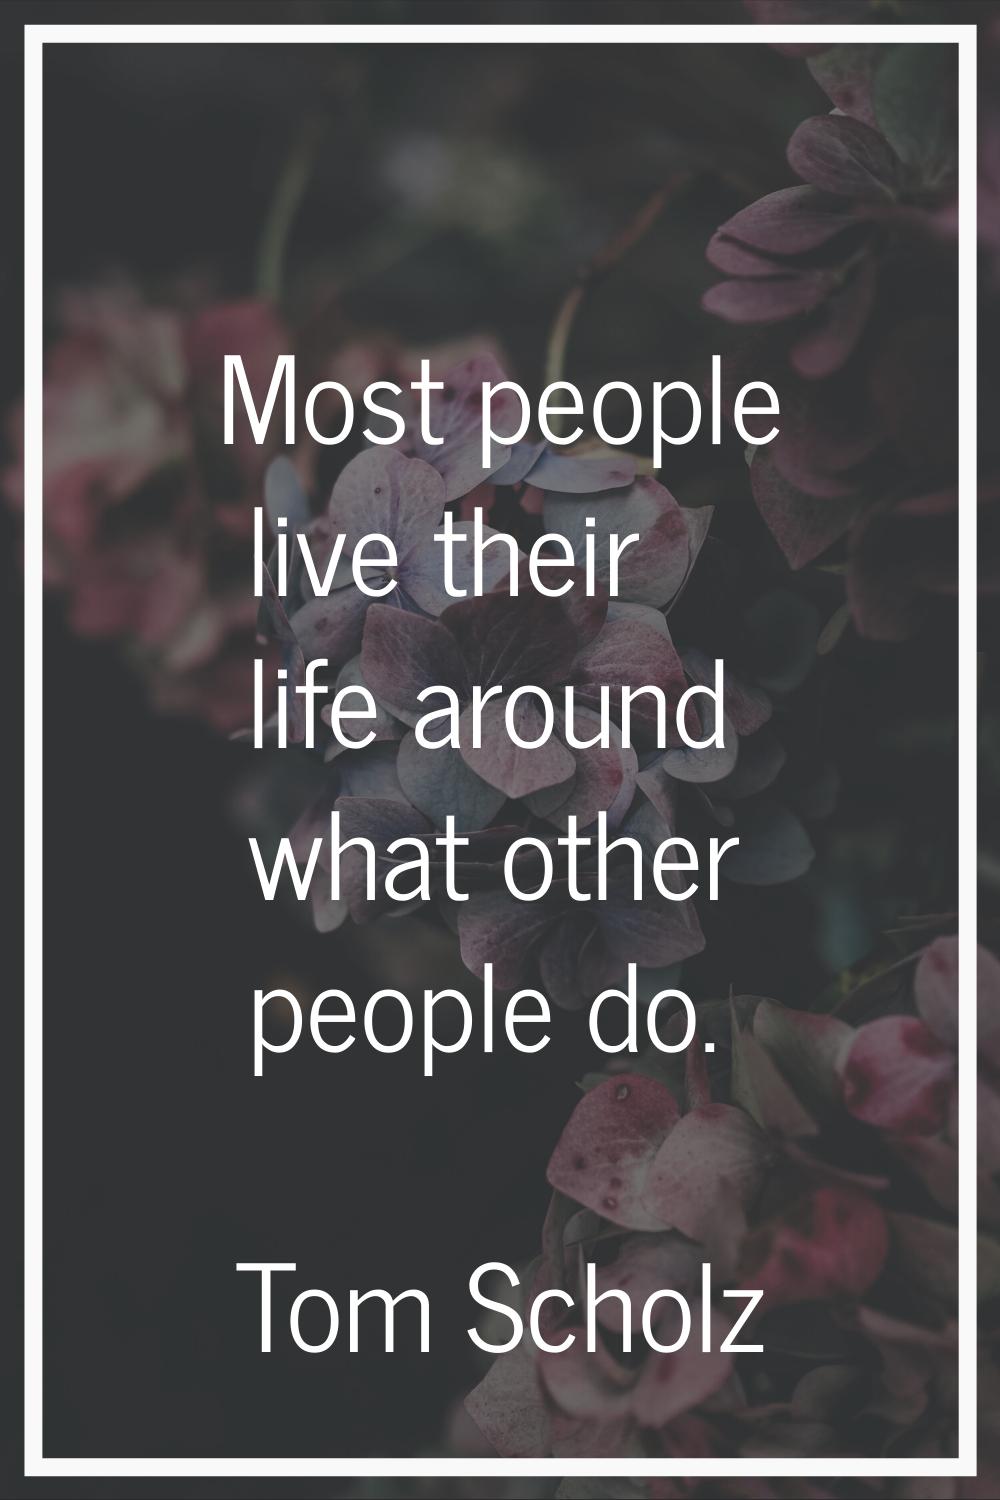 Most people live their life around what other people do.